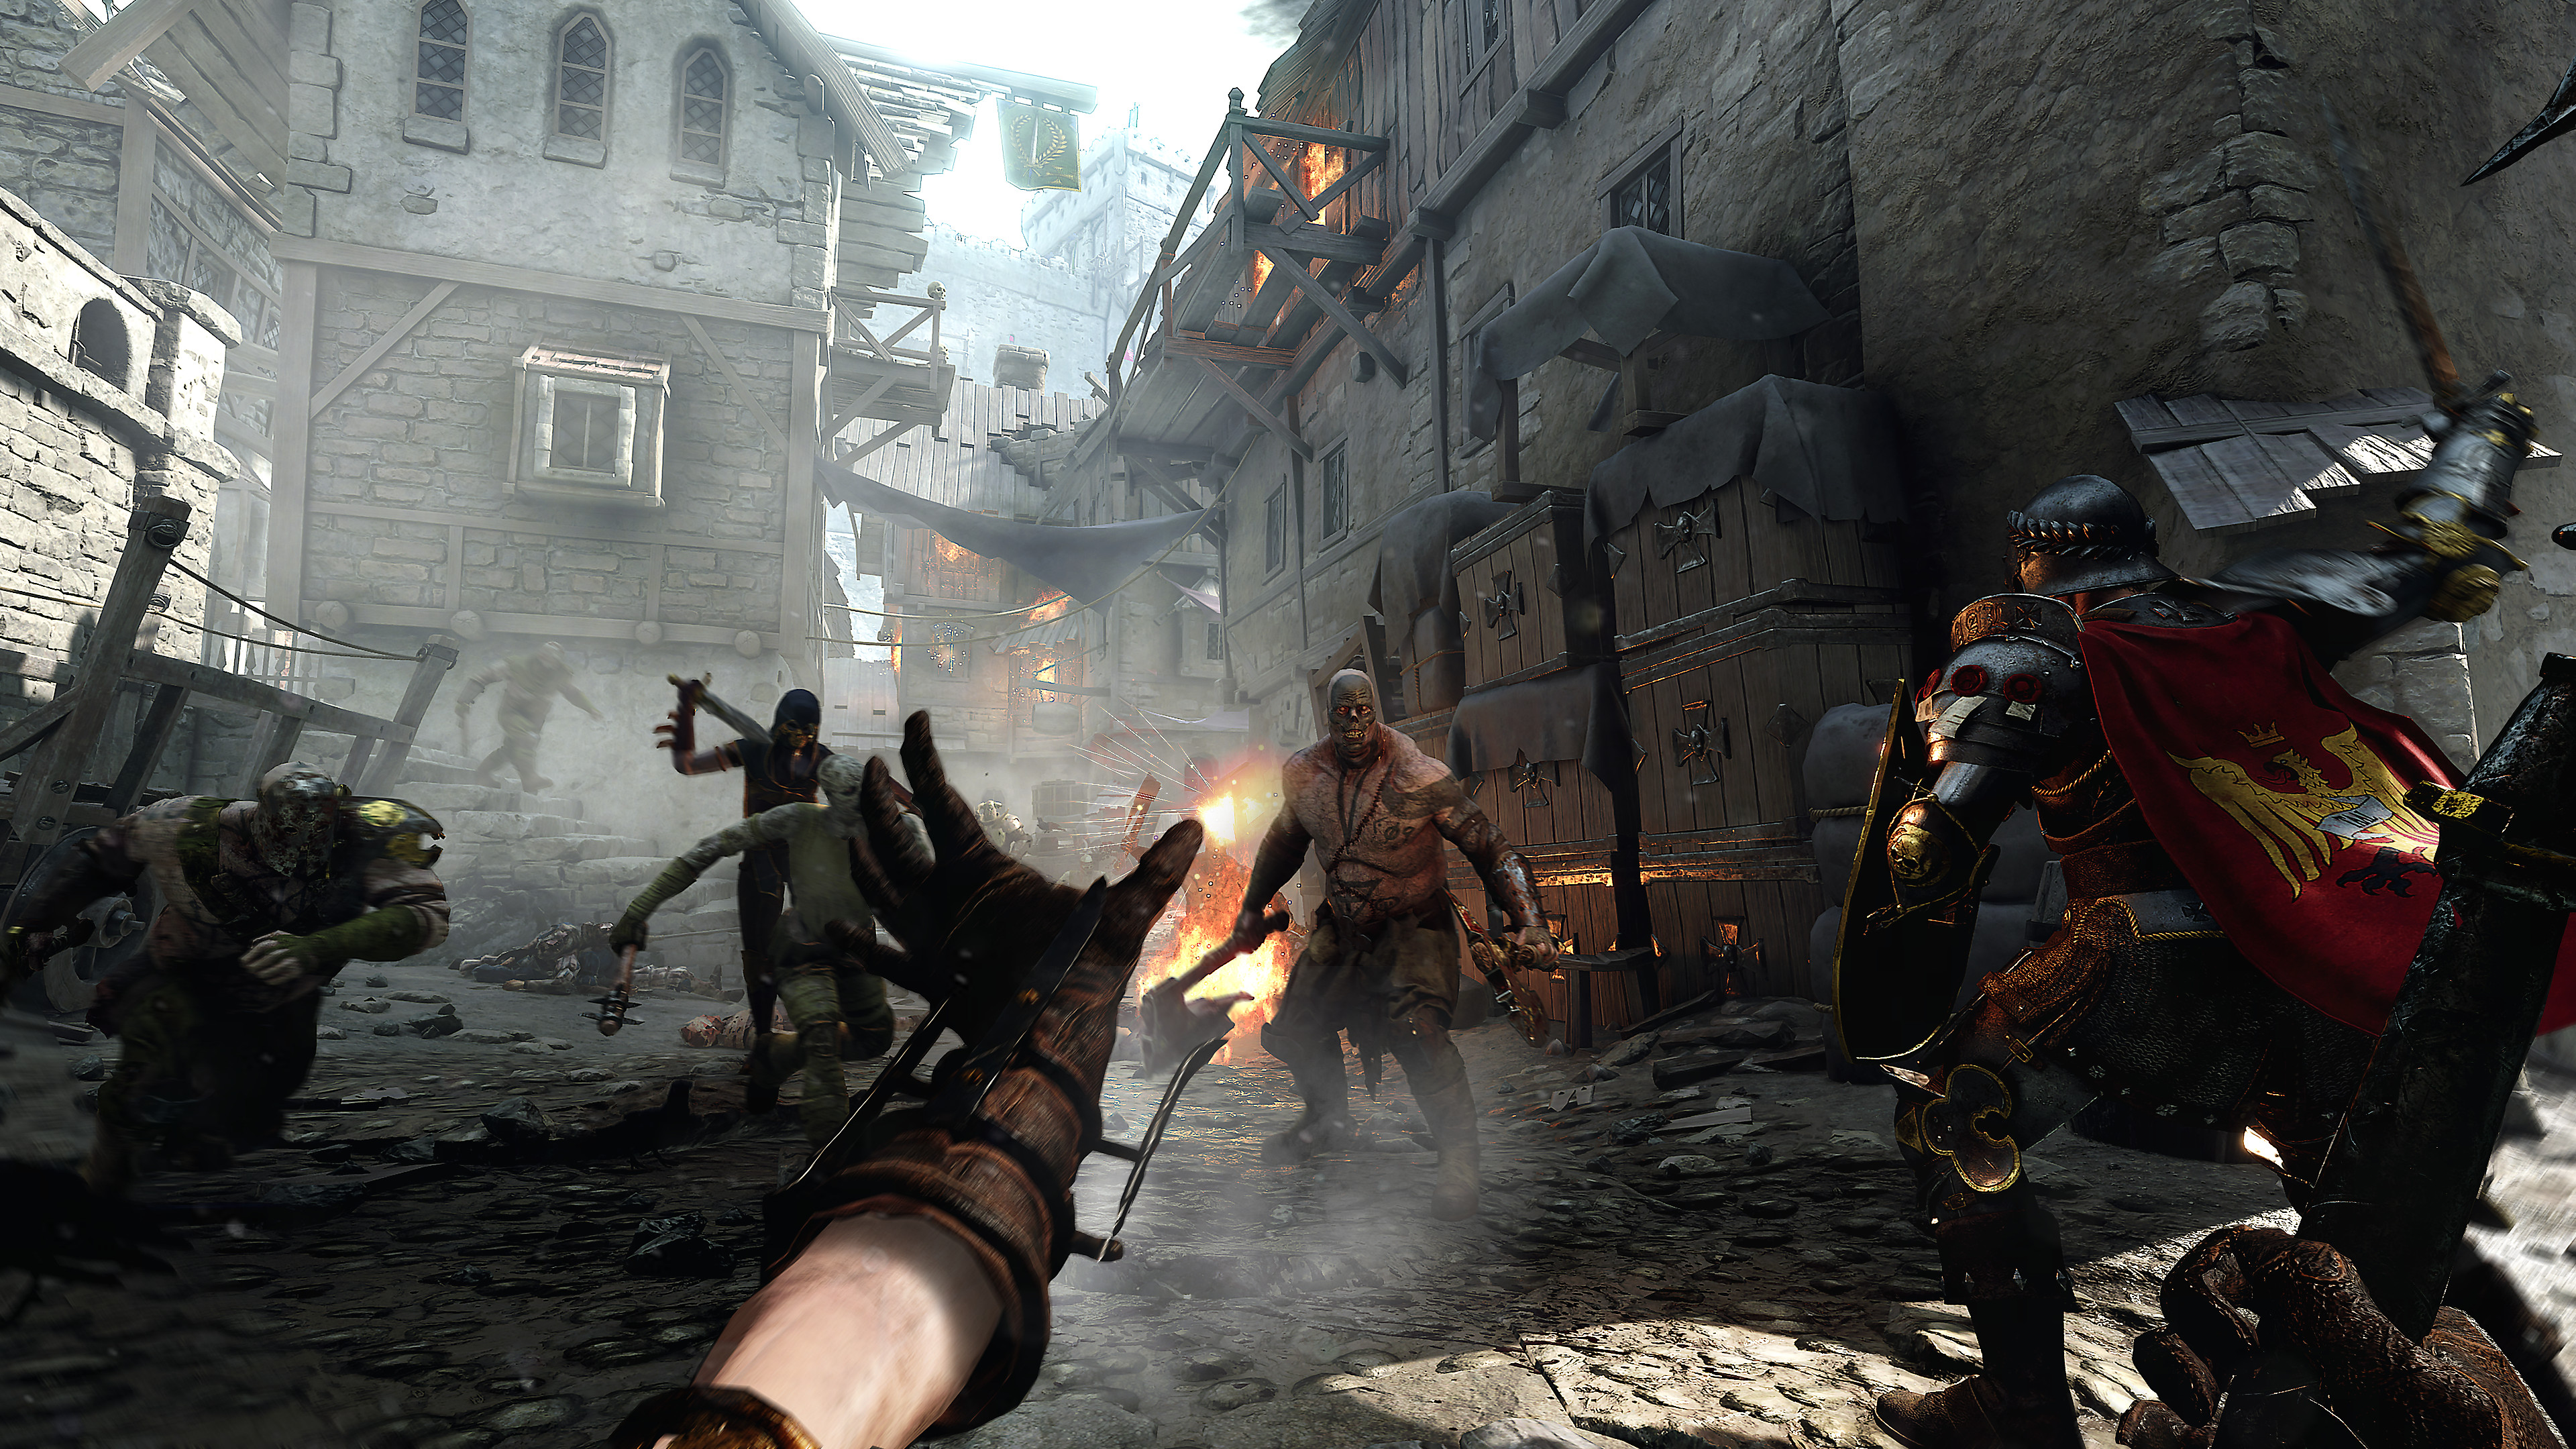 download warhammer vermintide 2 ps4 cusa13645 – eur direct links dlgames - download all your games for free